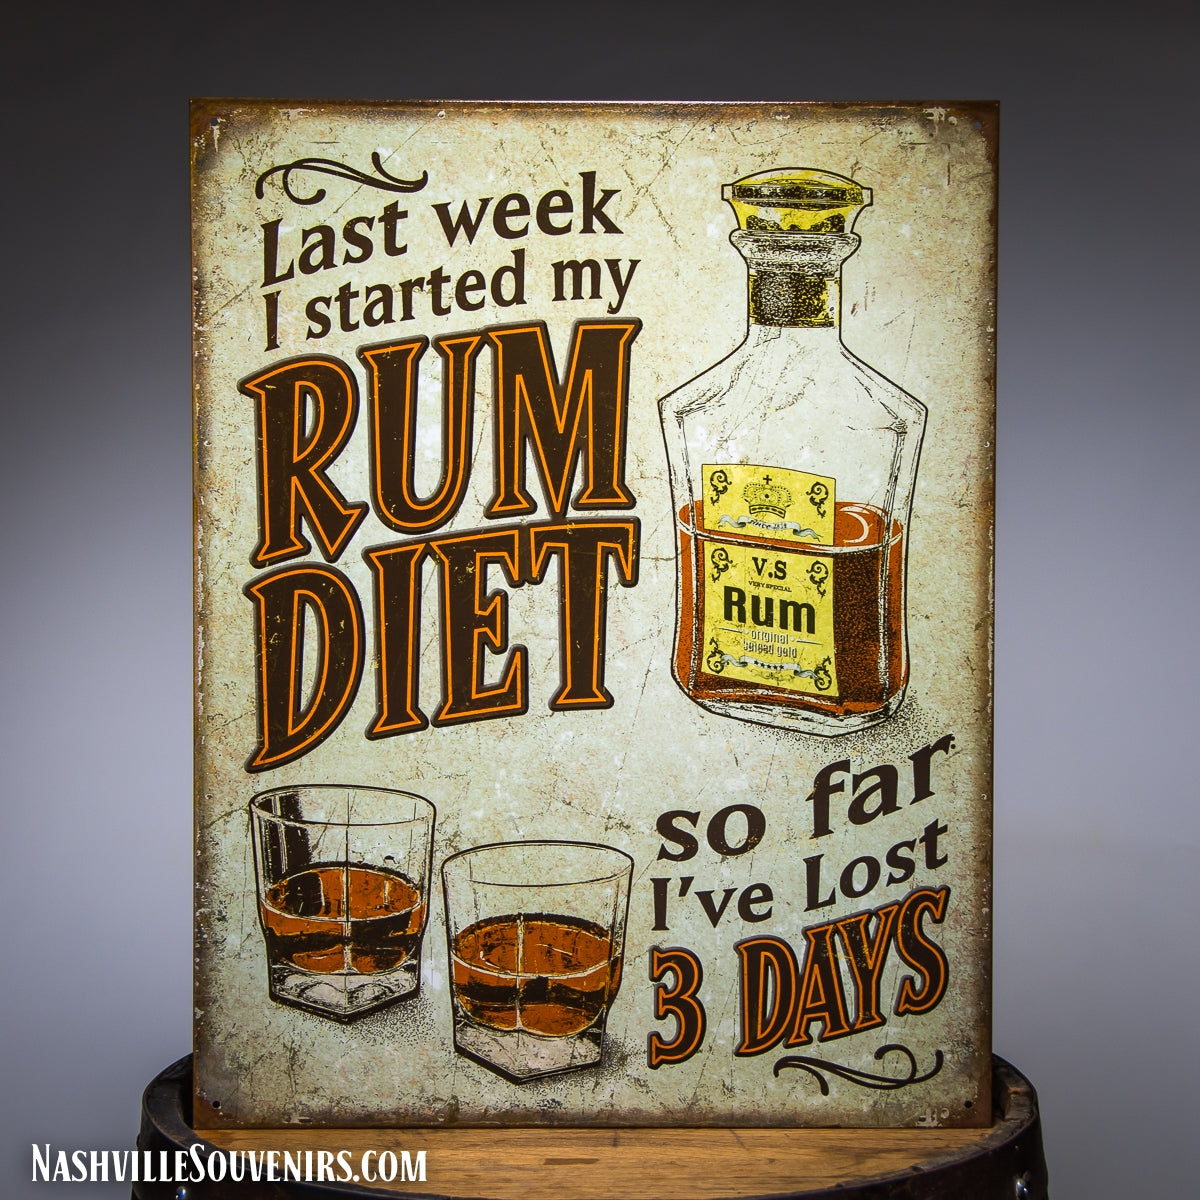 Last week I started my Rum Diet, so far I've lost 3 days Tin Sign